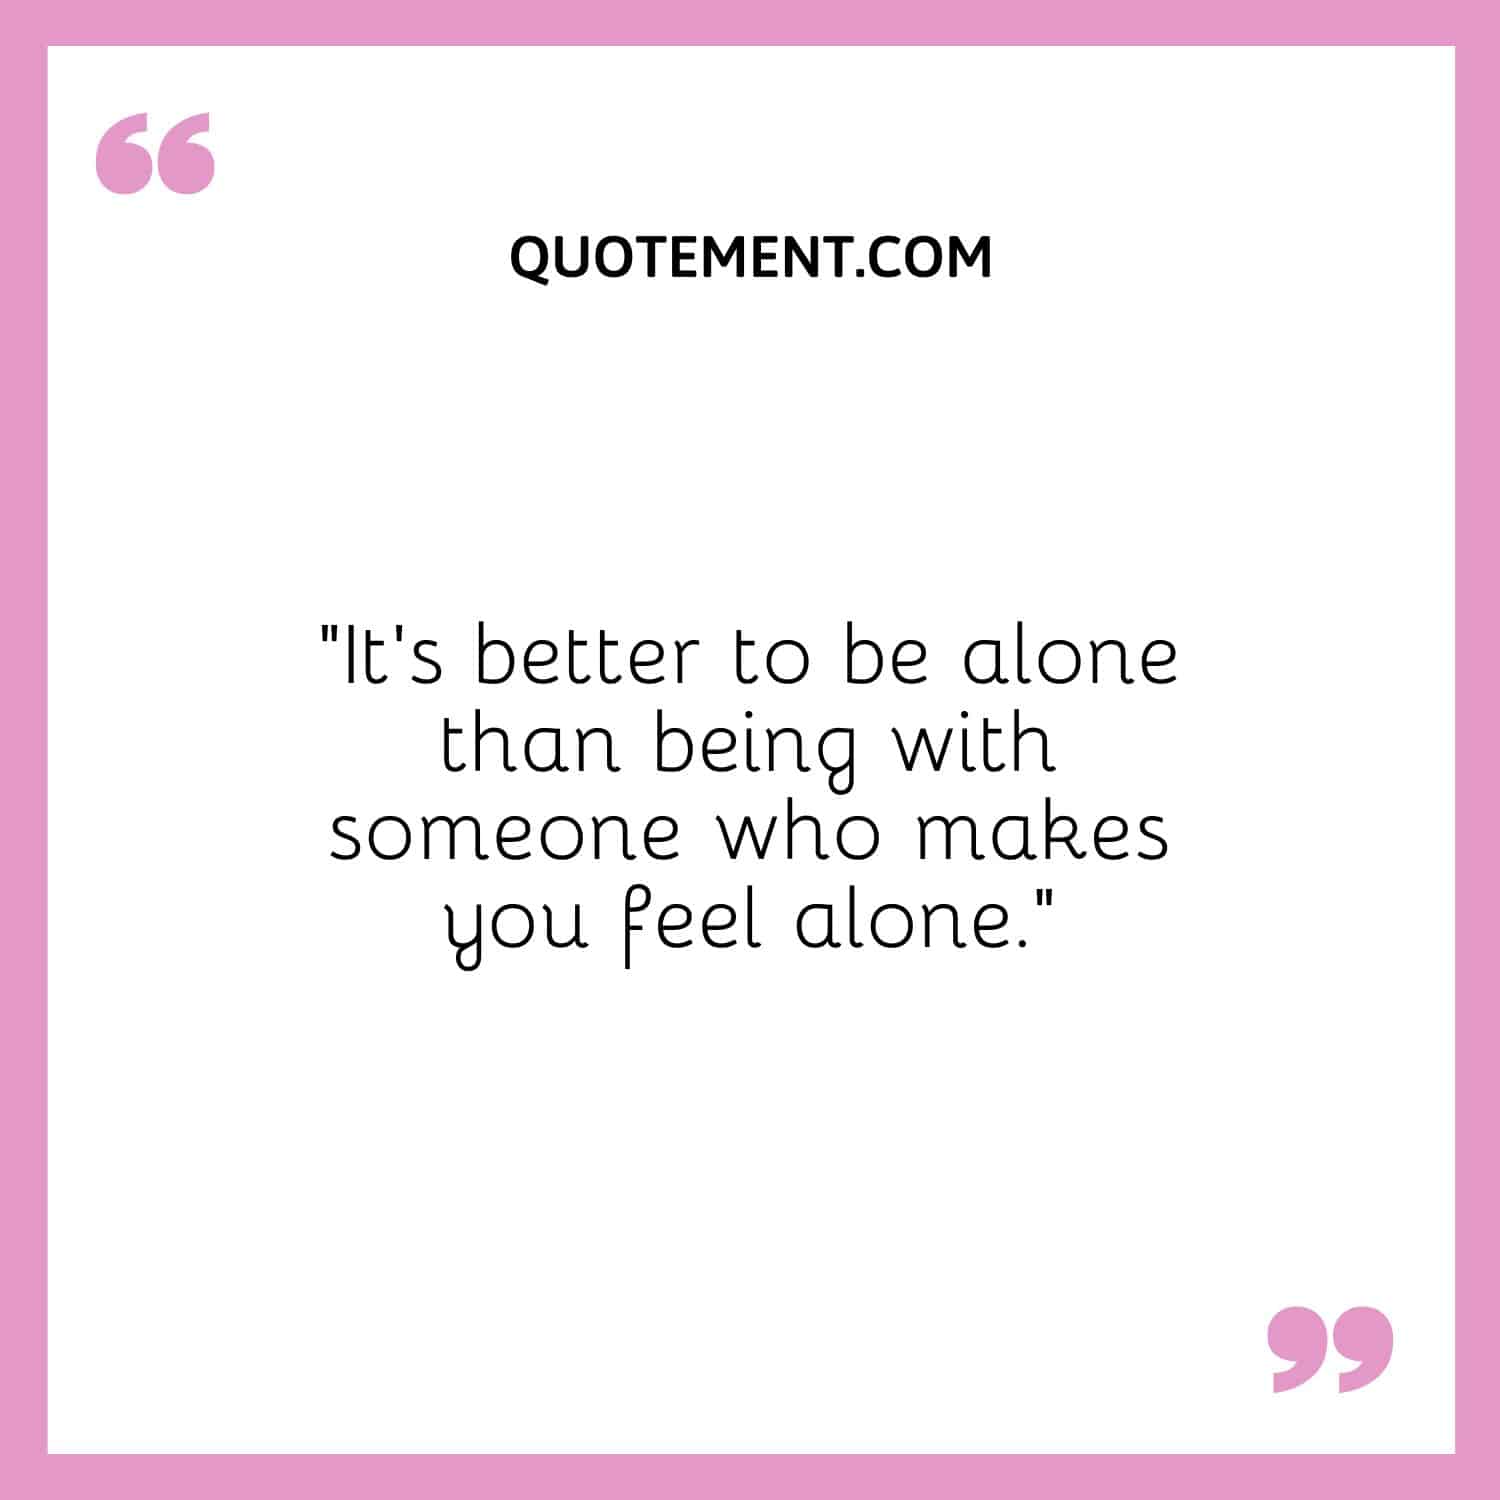 It's better to be alone than being with someone who makes you feel alone